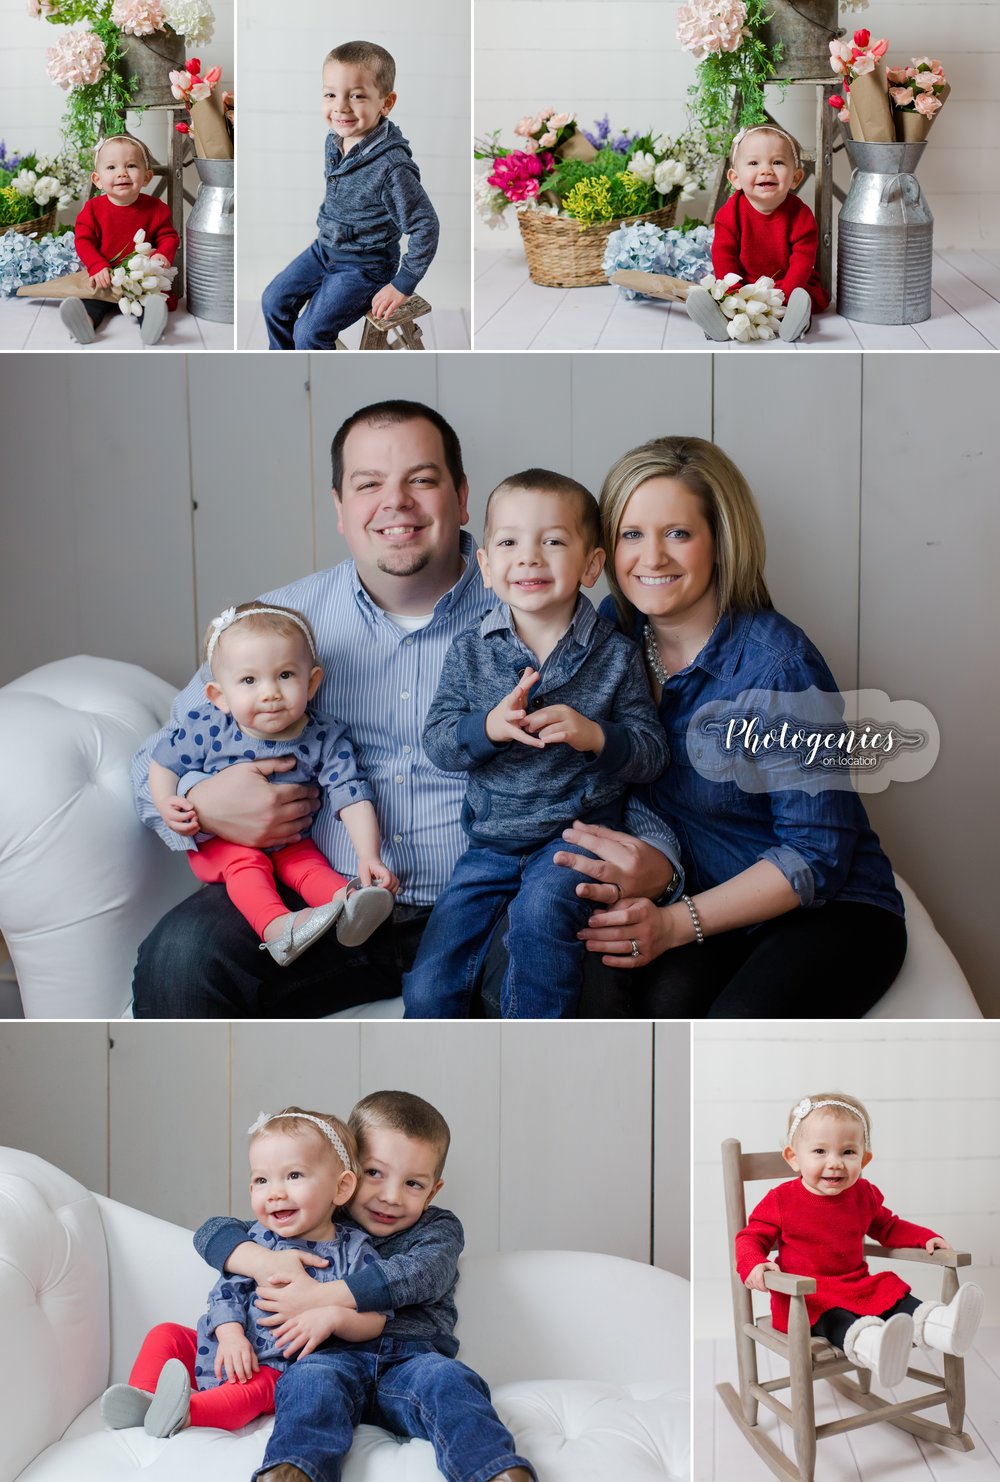  Birthday photo session. First birthday sibling photography. Brother and sister photography. big brother, little sister Valentine session.  Boy Valentine Session.  Photography Studio Session.  Floral. Photo set ideas.  Neutral photography.  Family photography indoors.  